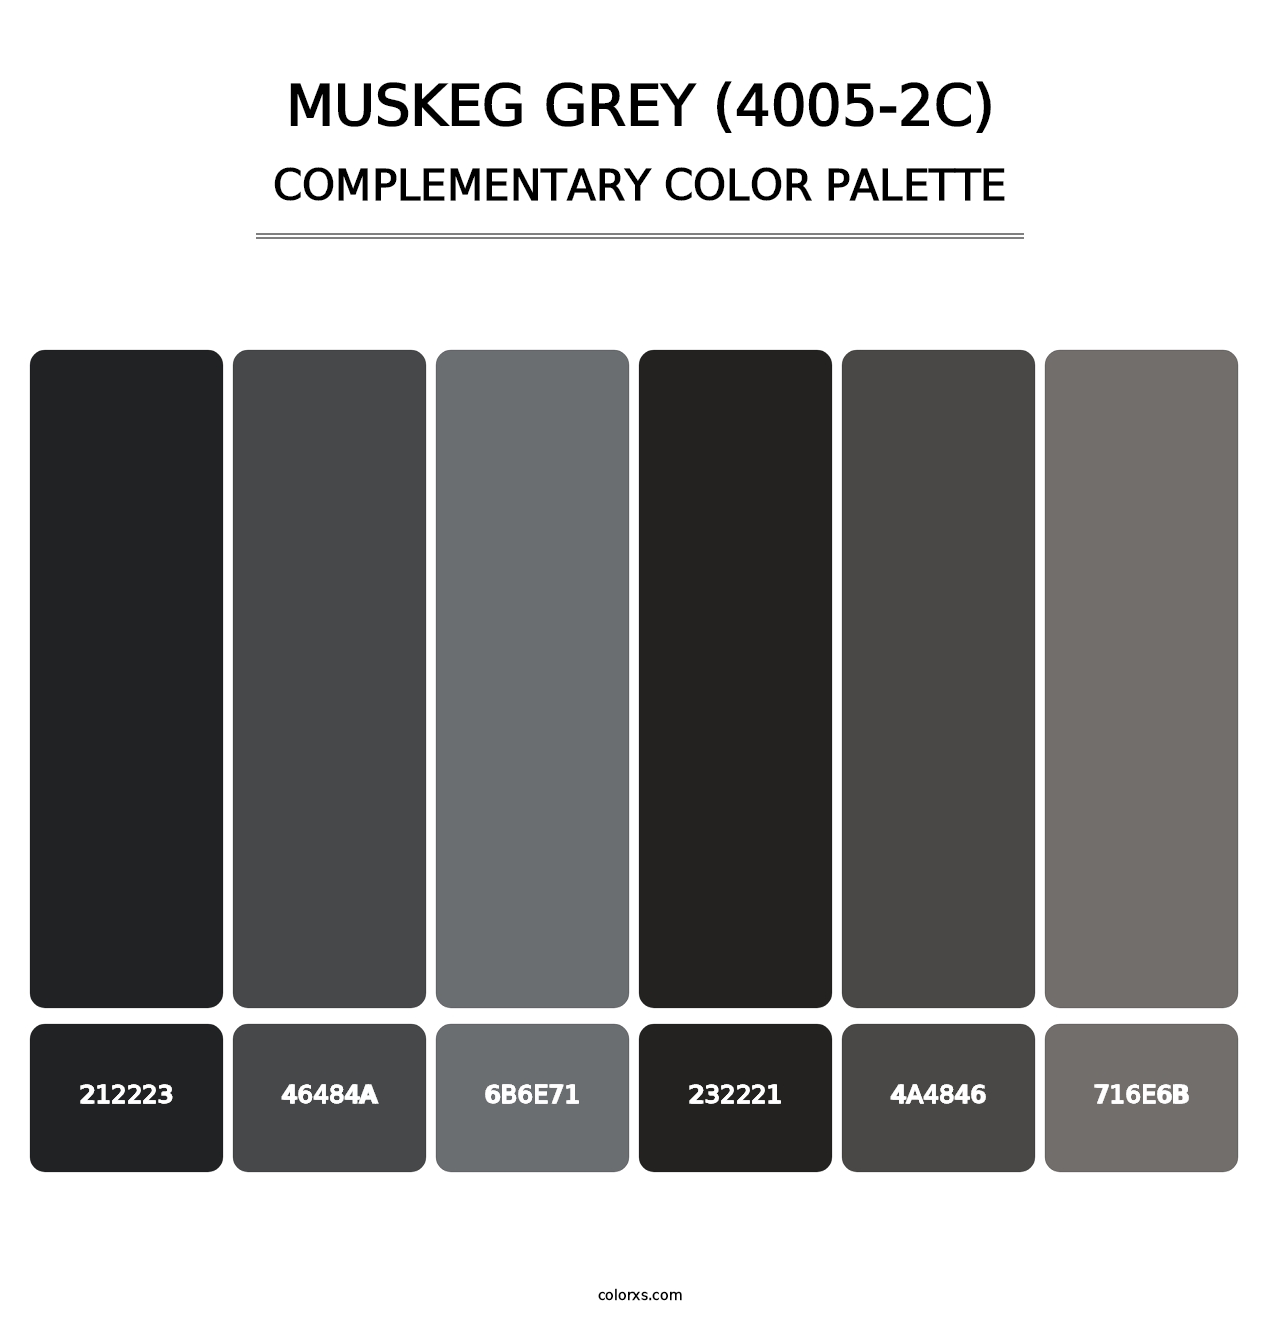 Muskeg Grey (4005-2C) - Complementary Color Palette